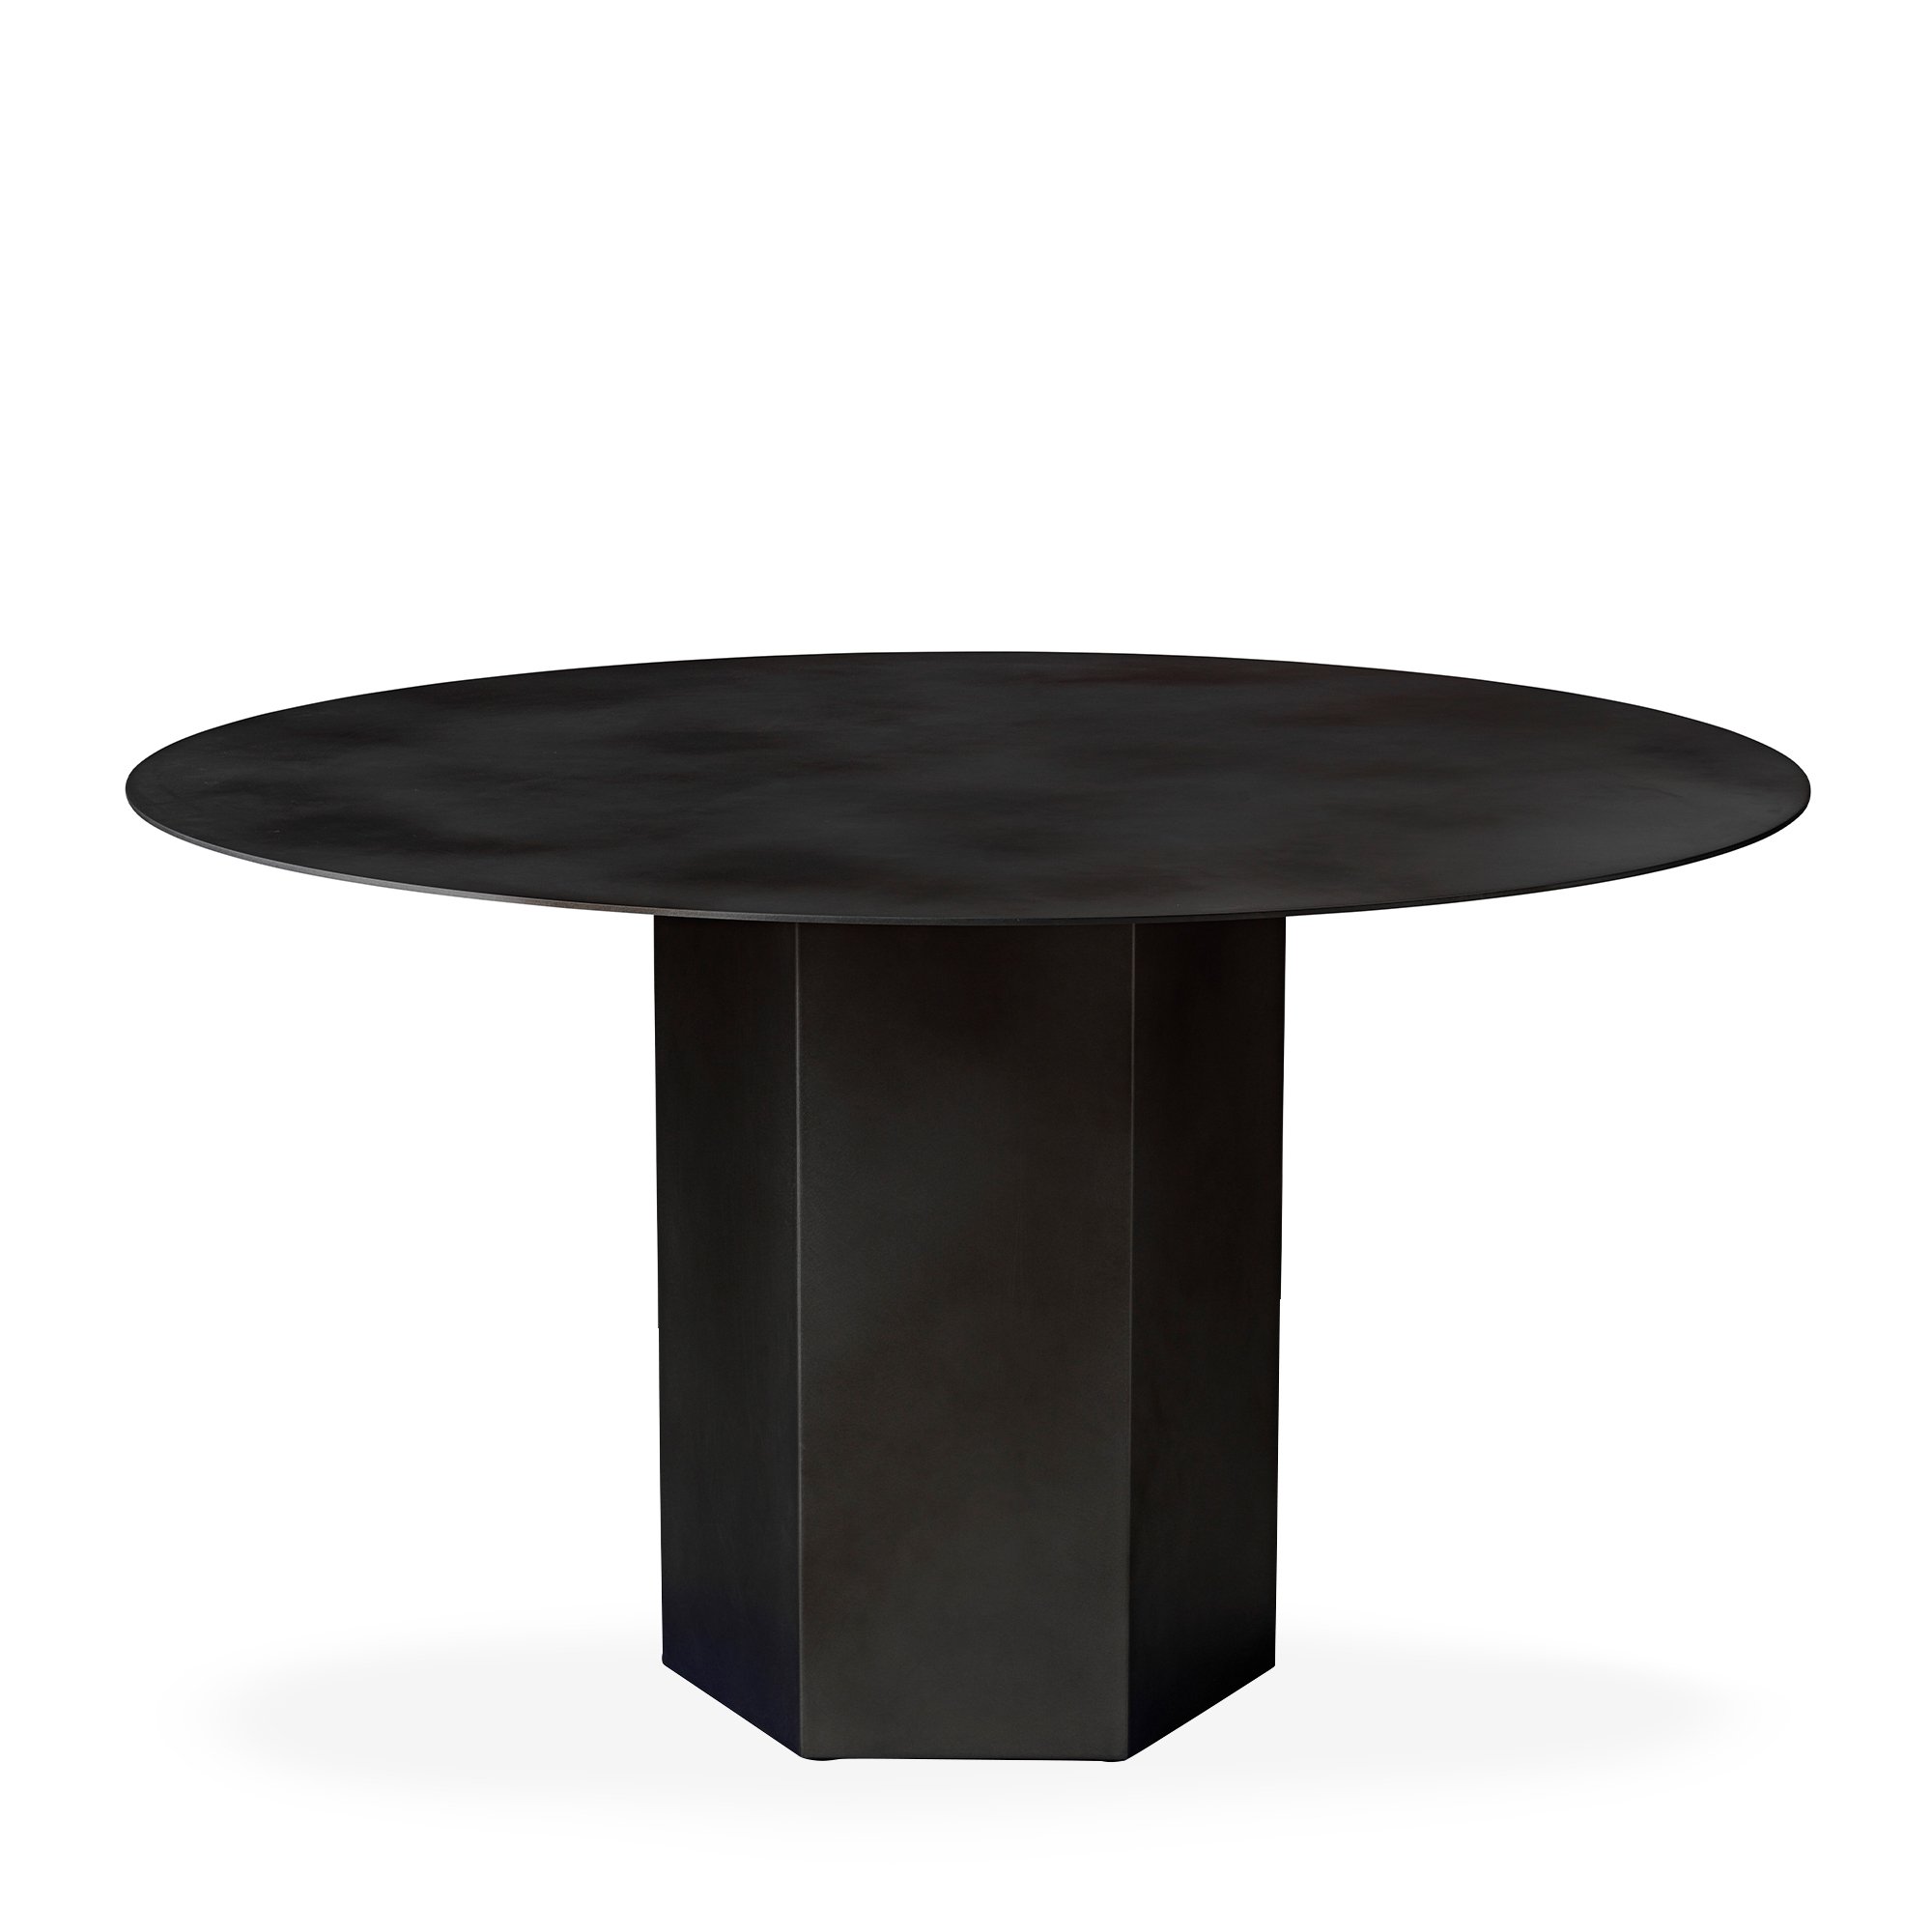 Epic Dining Table in Midnight Black 130cm By GUBI